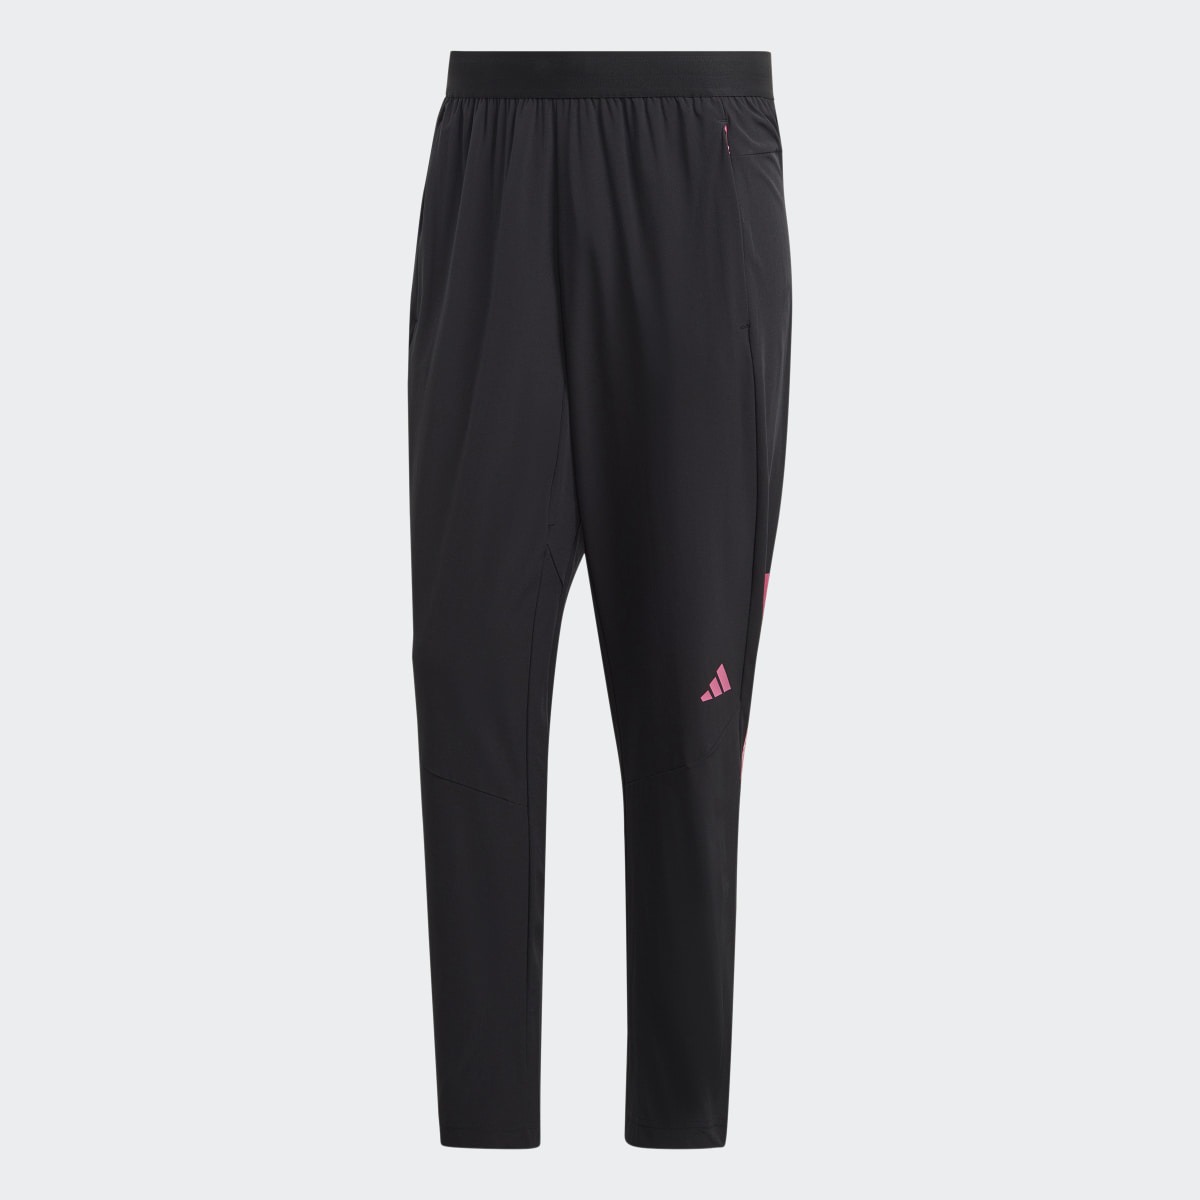 Adidas HIIT Pants Curated By Cody Rigsby. 4